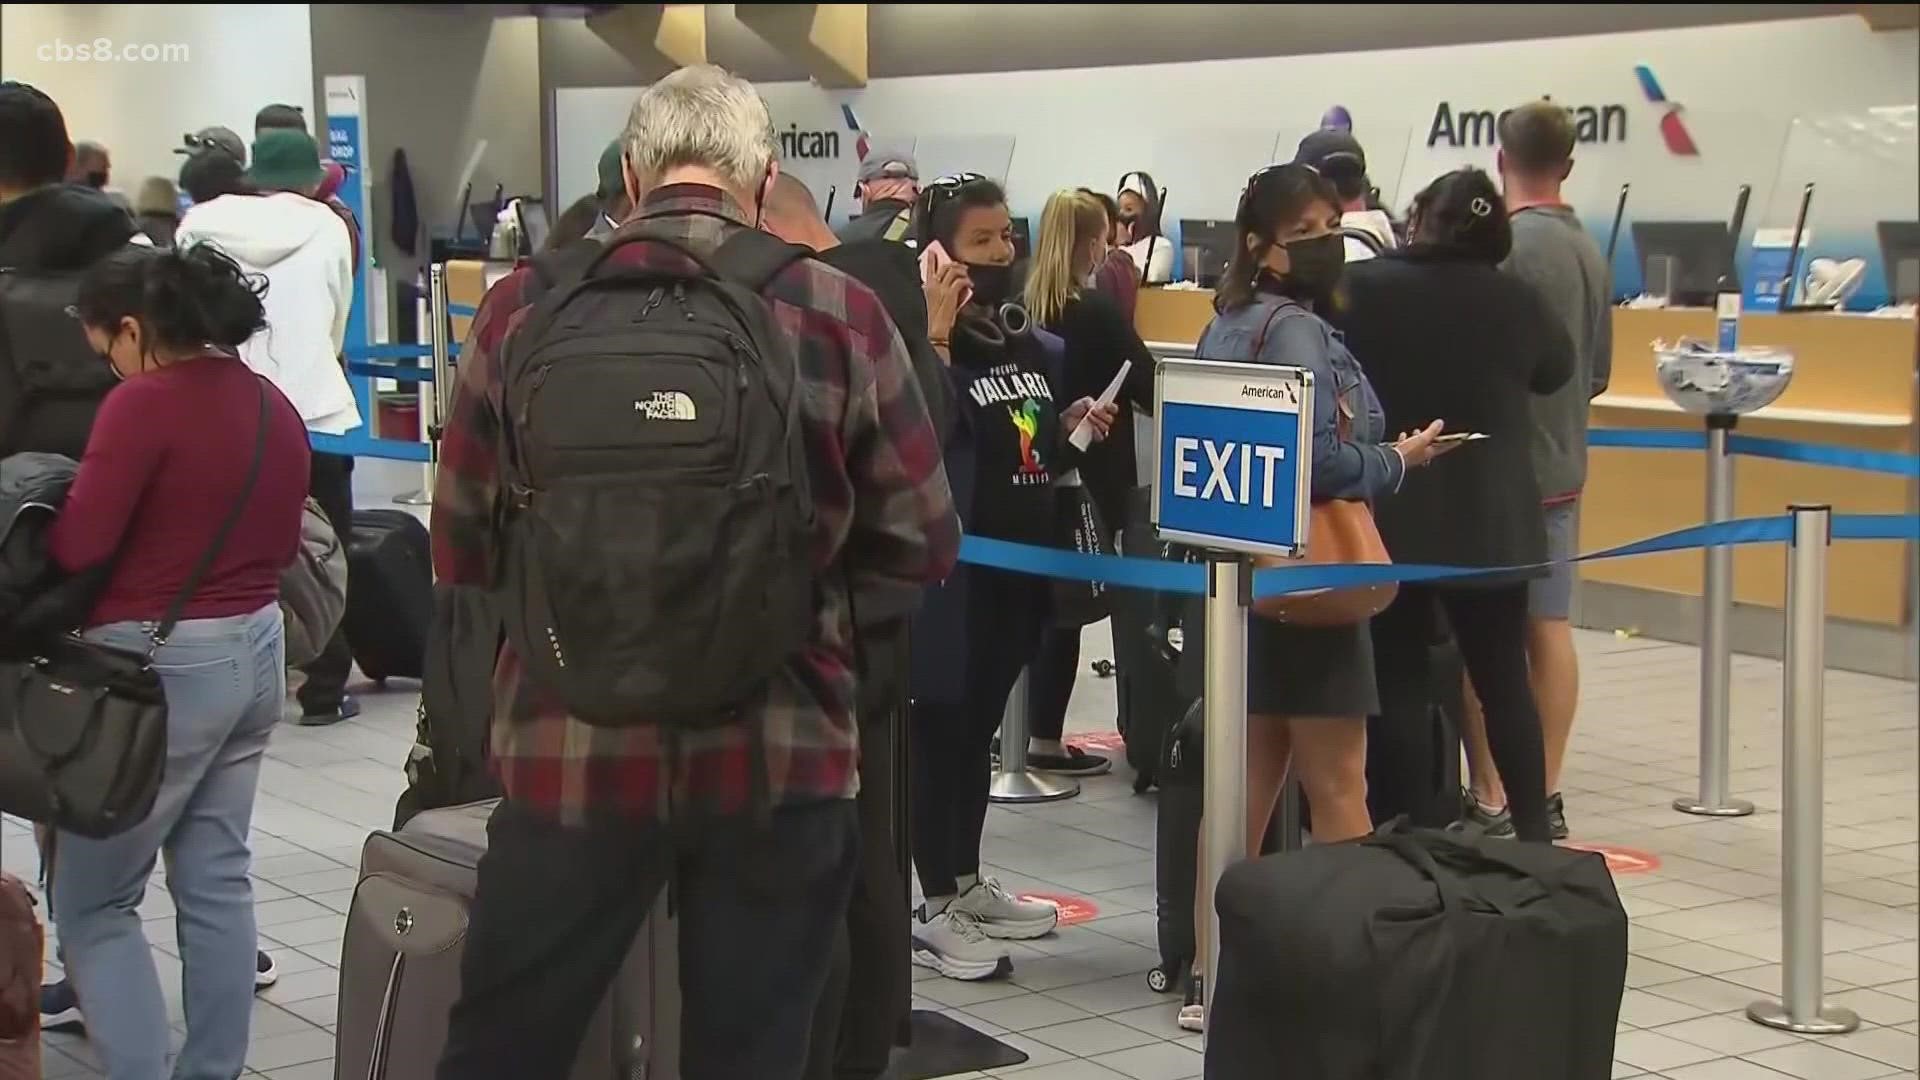 The airline canceled more than 1,900 flights total this weekend across the country.